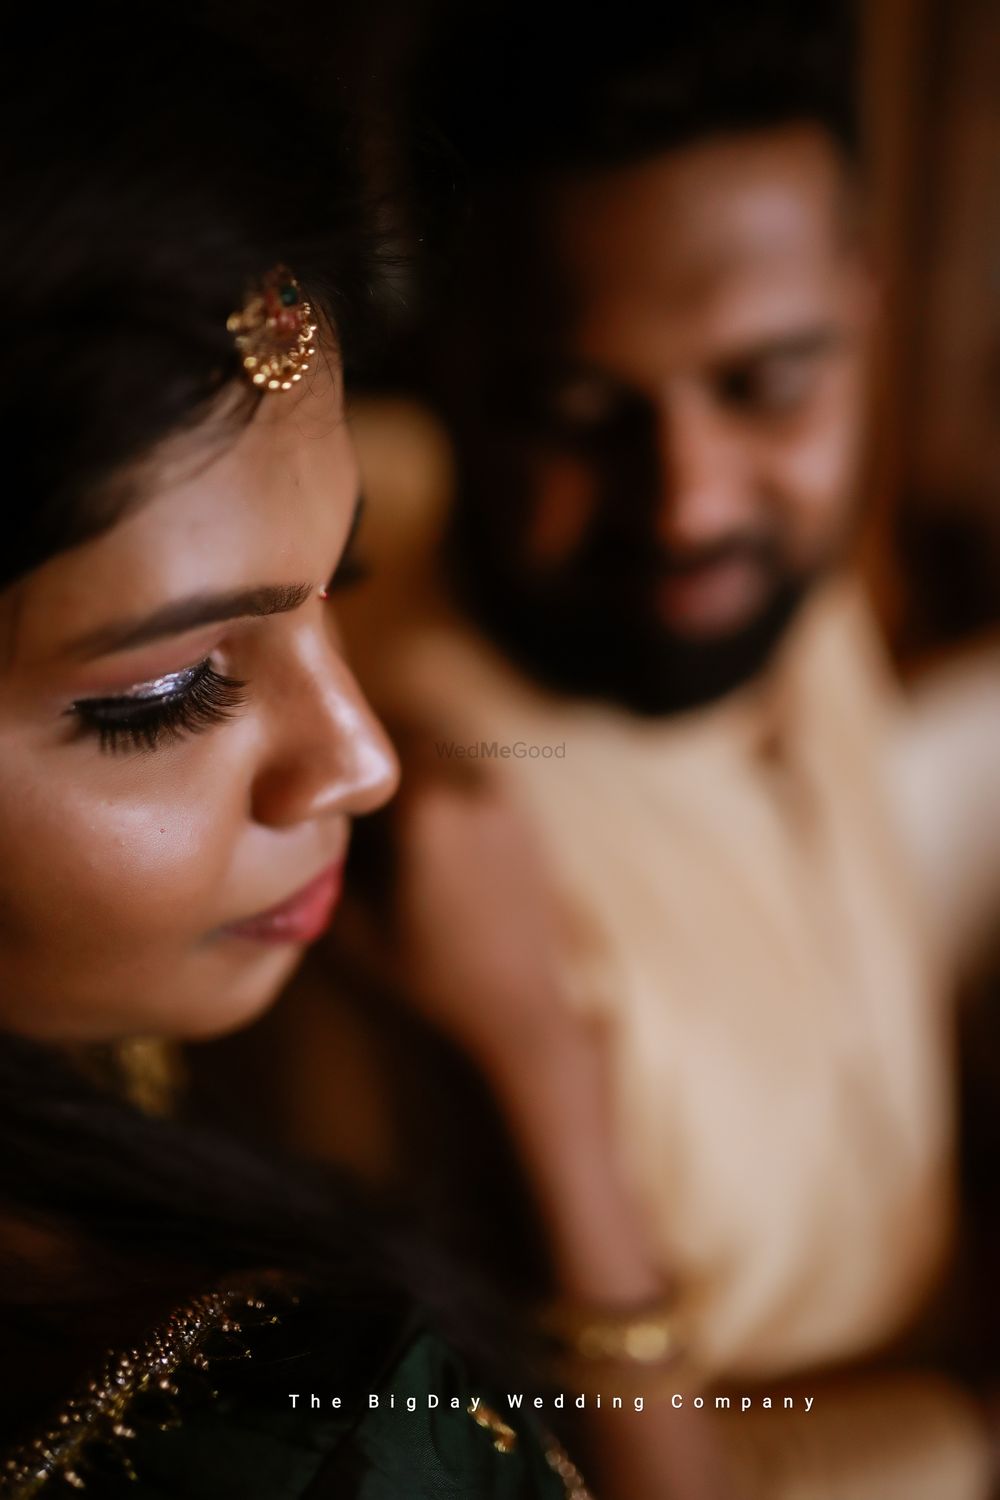 Photo From hindhu engagement day - By The Big Day Wedding Company